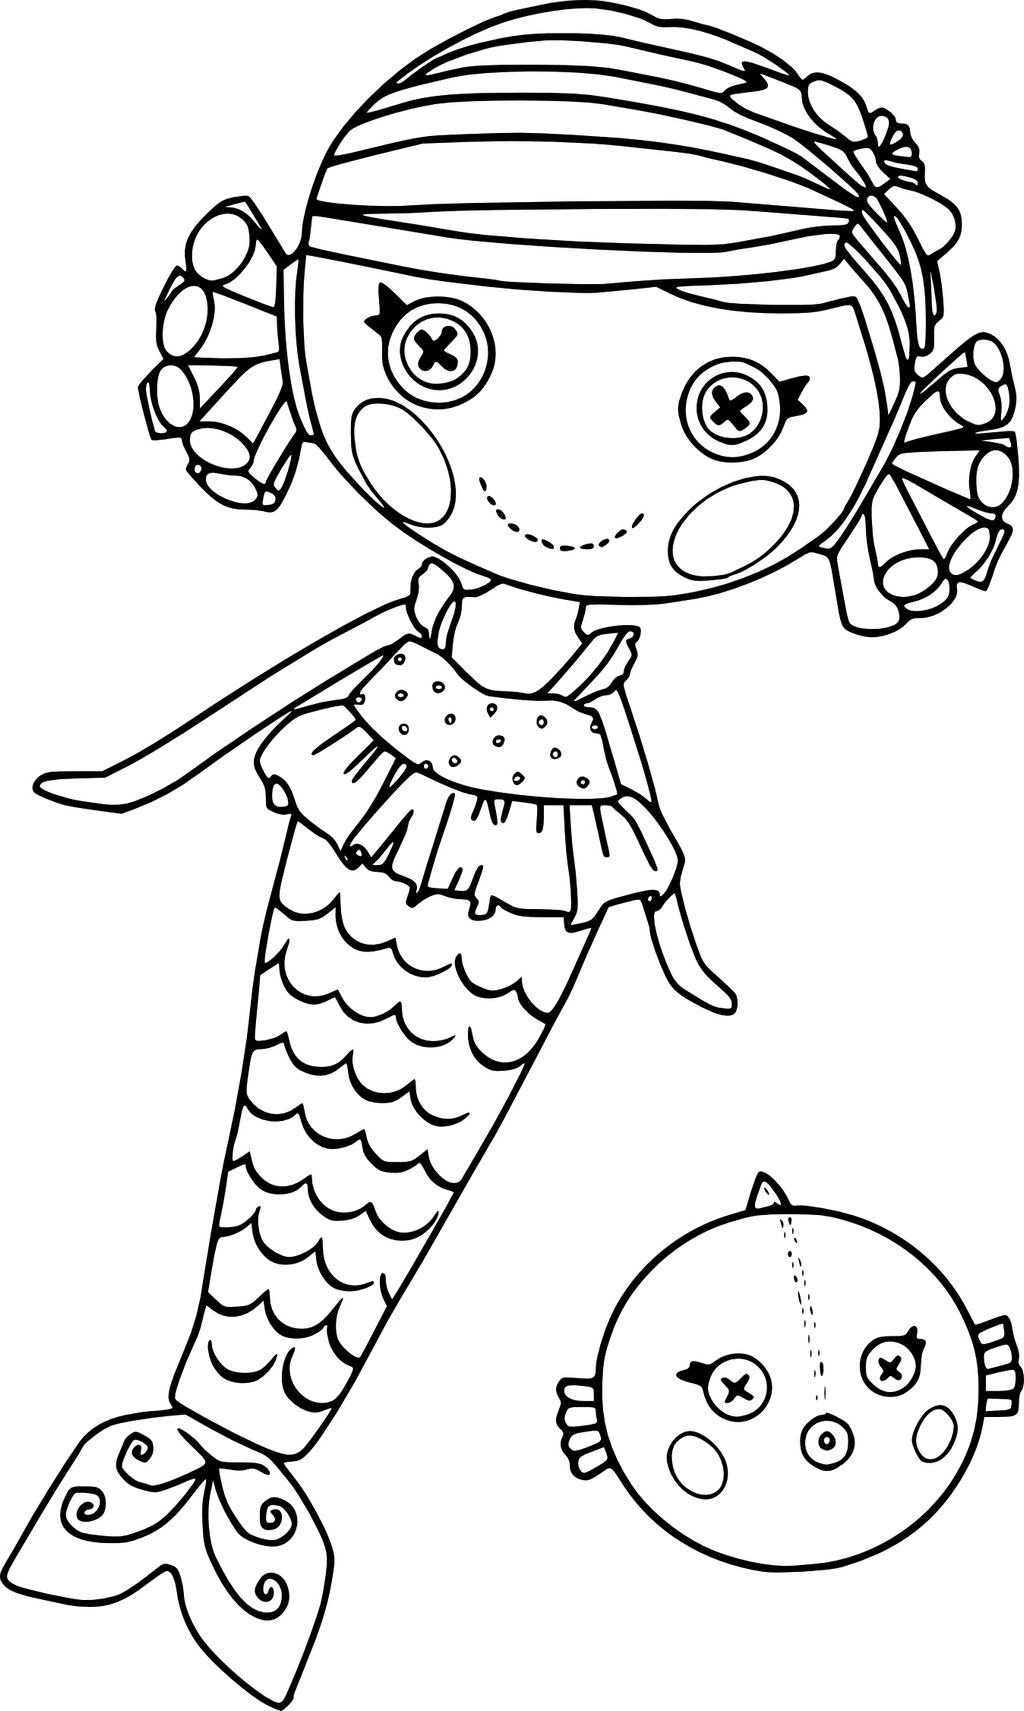 lalaloopsy coloring pages online